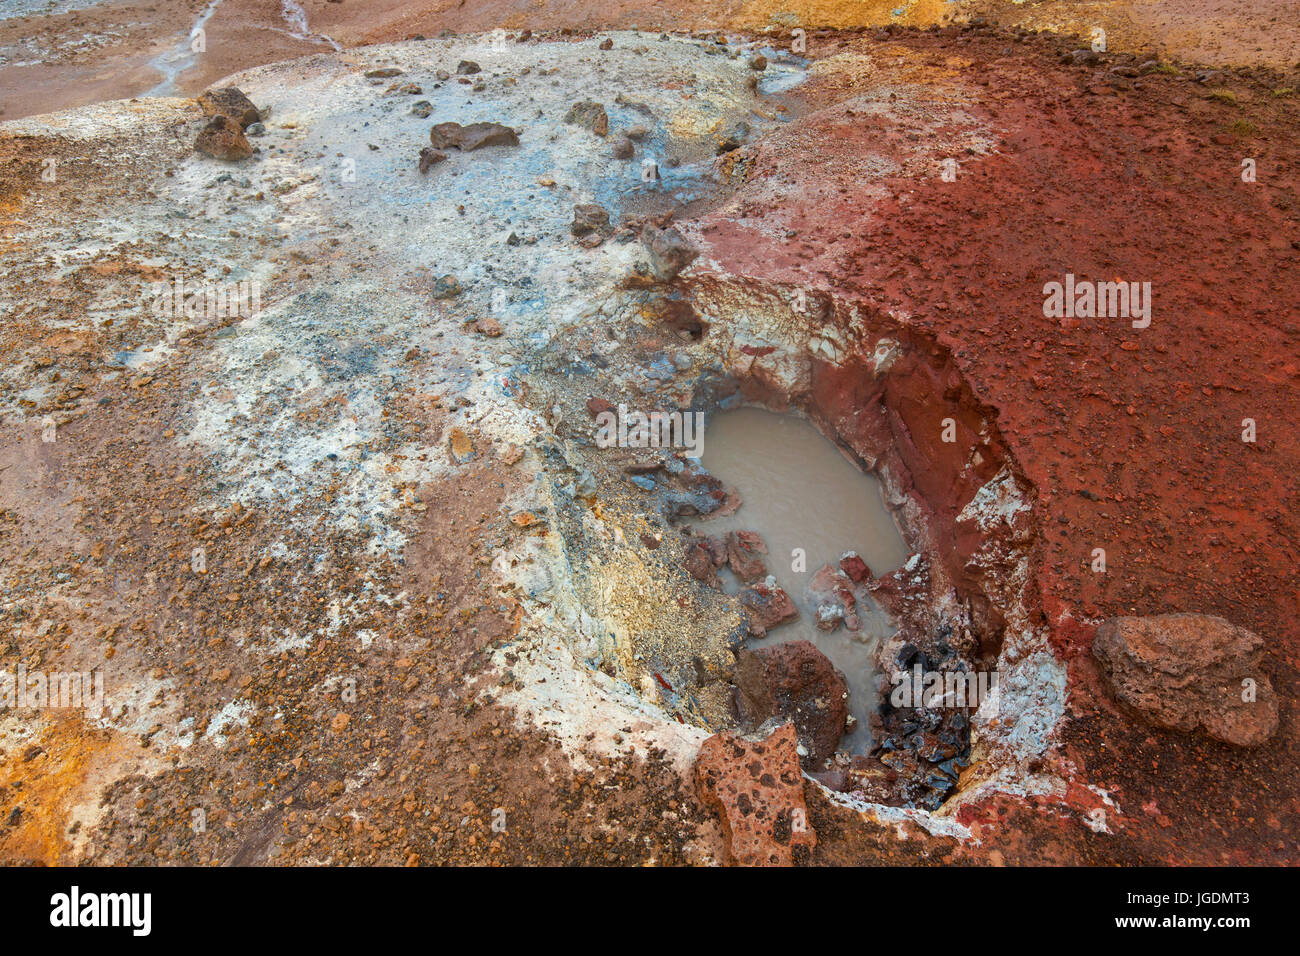 Bubbling mud in mudpot / mud pool at Seltun, geothermal field showing volcanic fumaroles, mud pots and hot springs, Reykjanes Peninsula, Iceland Stock Photo